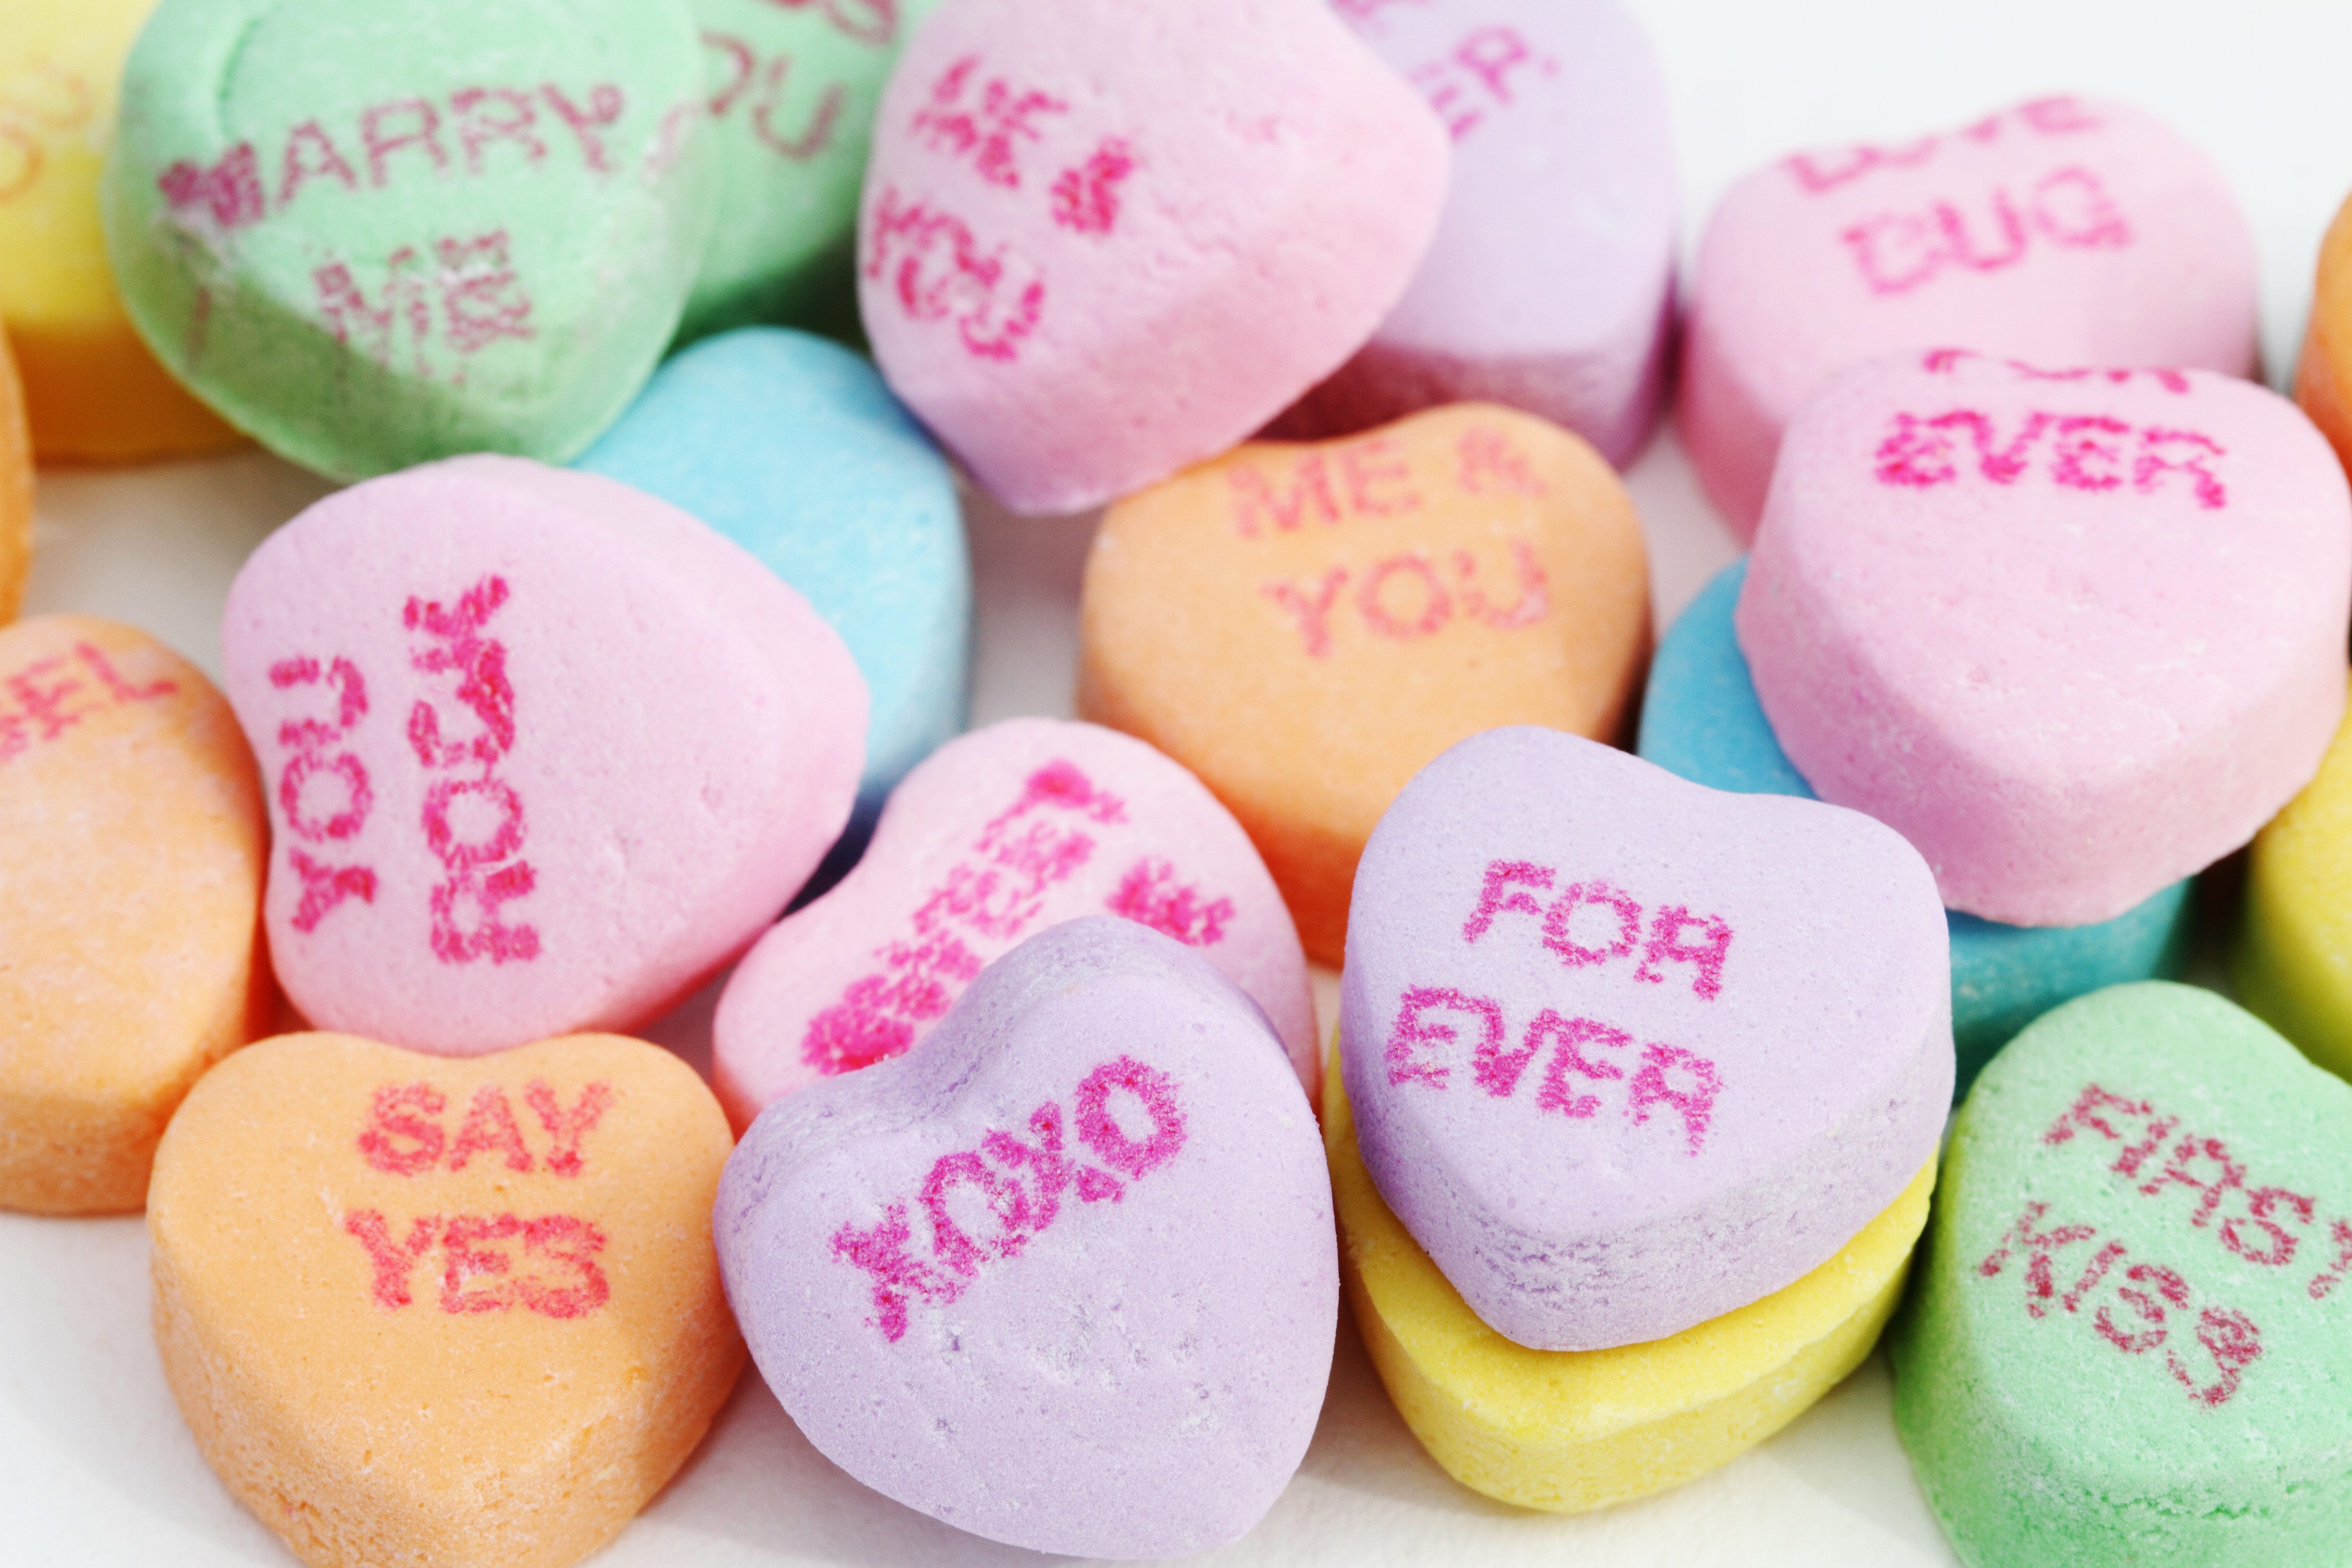 Why Sweethearts Are the Best Candy for Valentine's Day